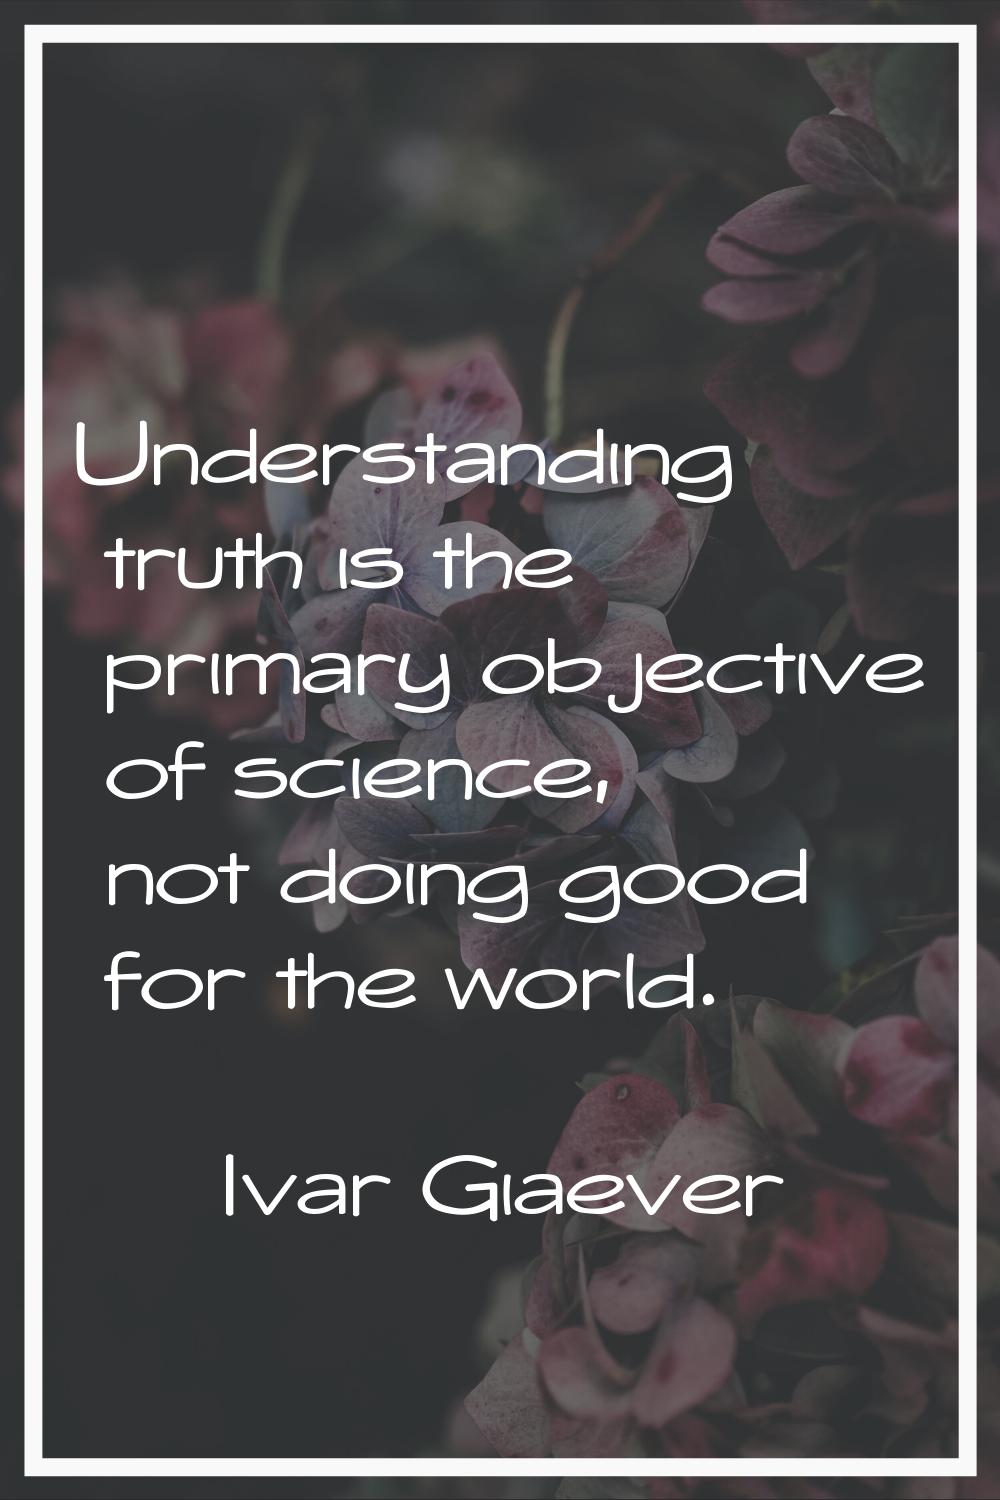 Understanding truth is the primary objective of science, not doing good for the world.